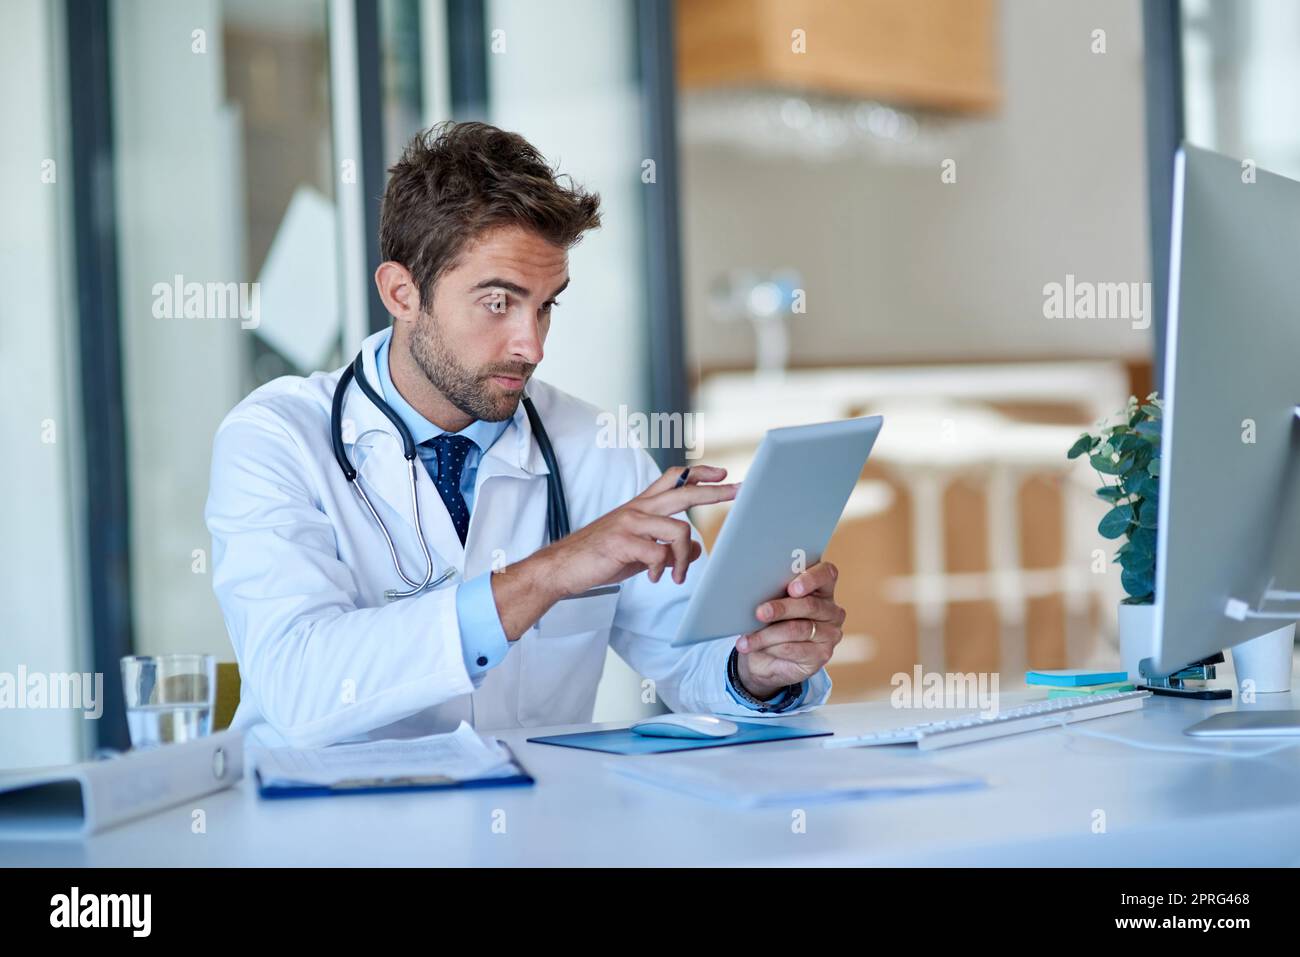 Technology is every practitioners best friend. a young doctor working on a digital tablet in his office. Stock Photo